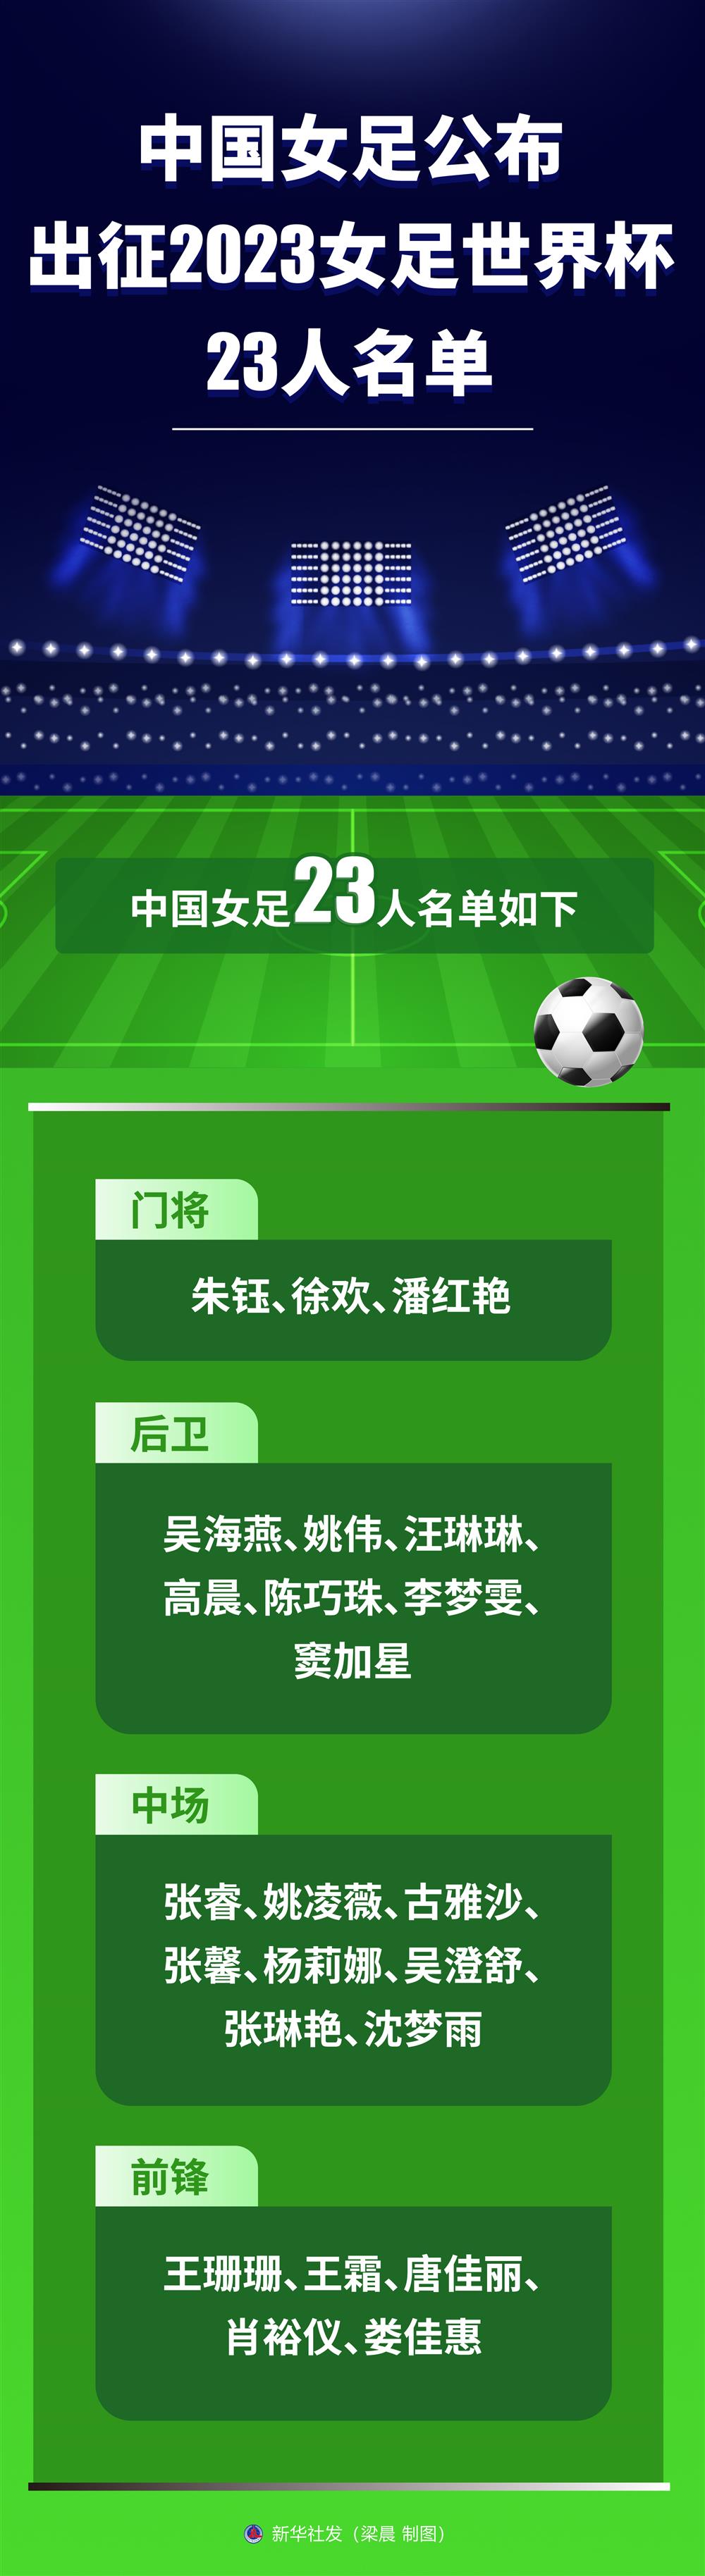 The Qiang Rose must first not fear strong opponents and approach the Women's World Cup: 1 to 10 "numerical solutions" 2023 Women's World Cup | Women's Football | Qiang Rose